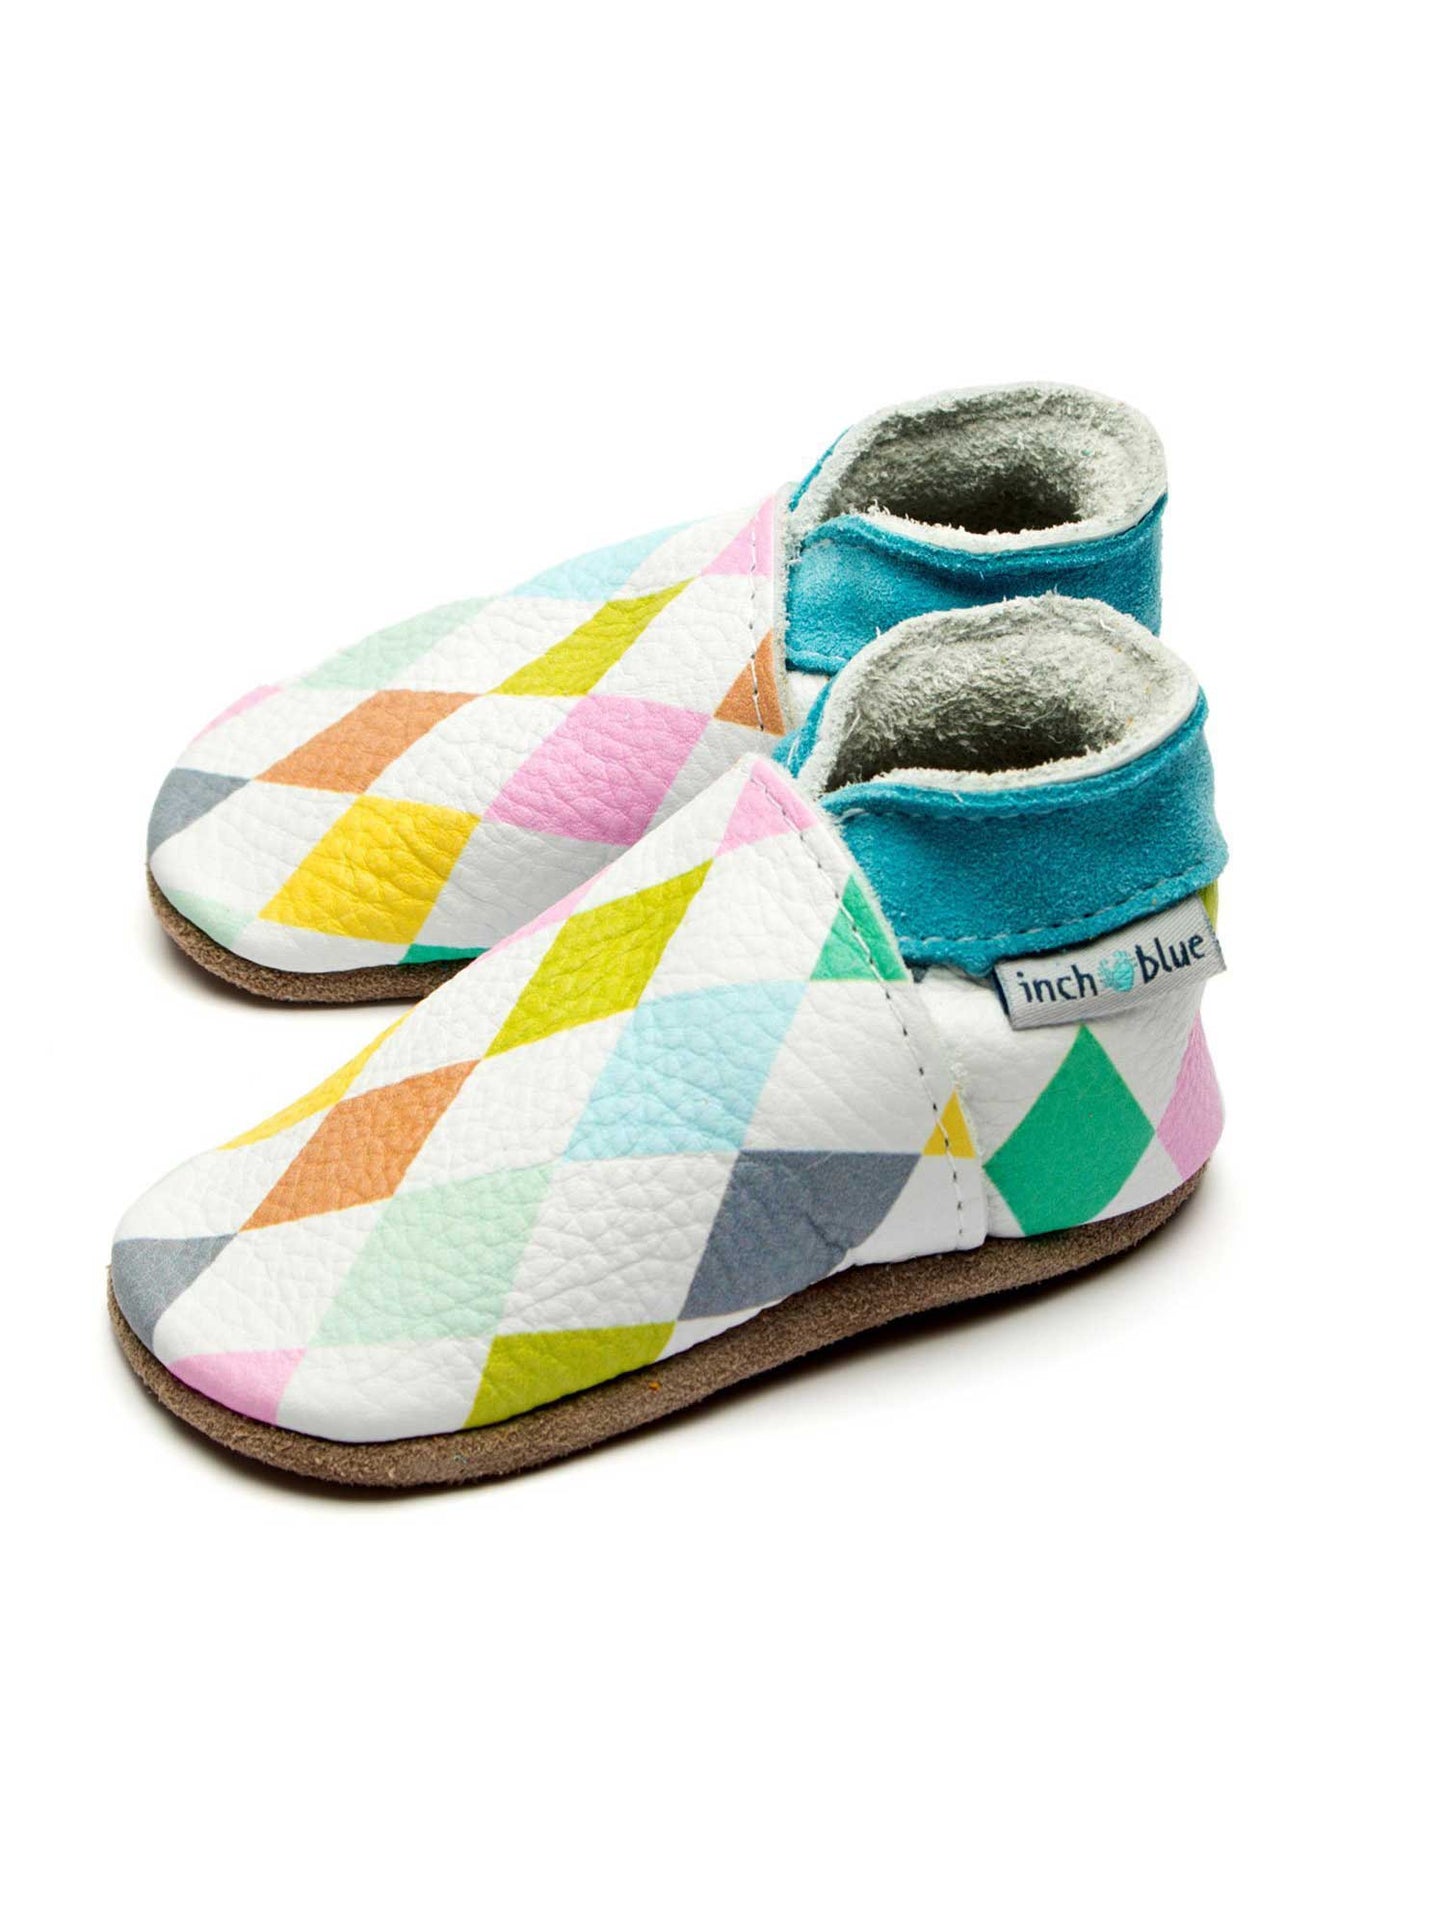 Harlequin Baby Shoes